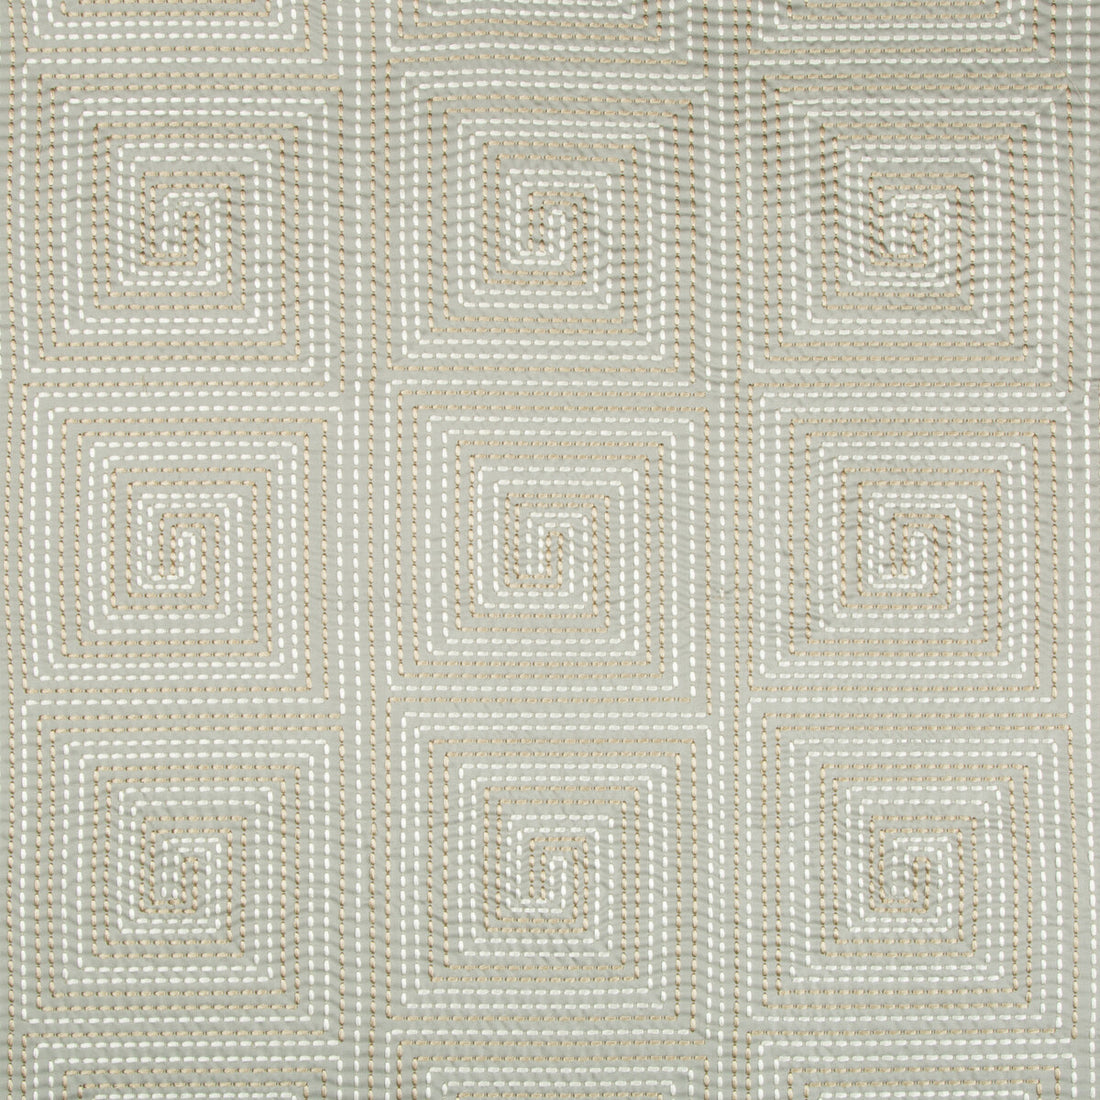 Edge Stitch fabric in platinum color - pattern 4453.1611.0 - by Kravet Couture in the Modern Tailor collection